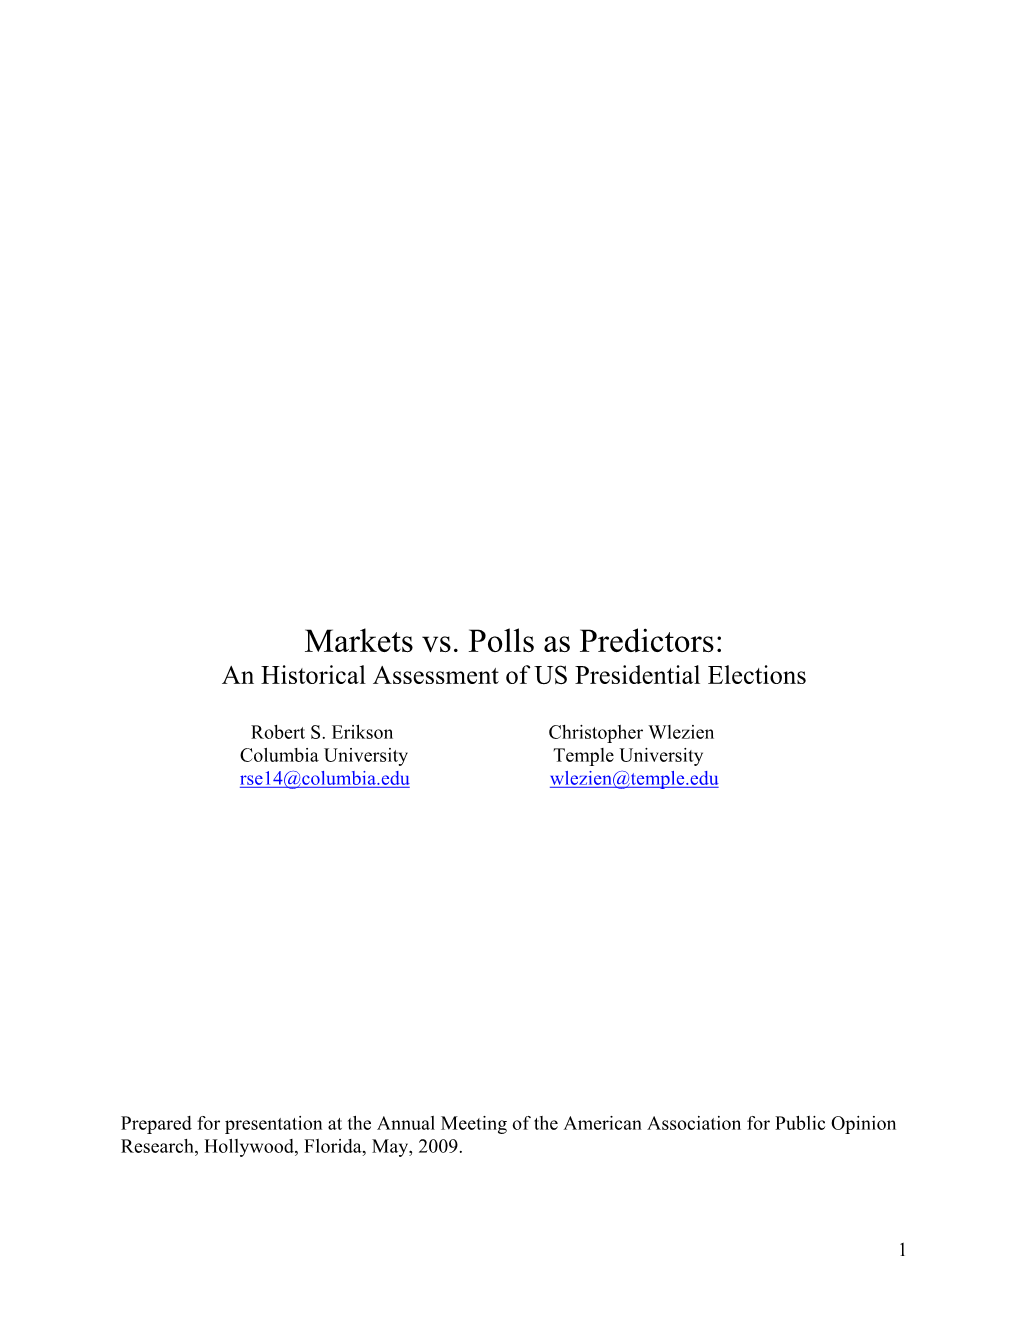 Markets Vs. Polls As Predictors: an Historical Assessment of US Presidential Elections